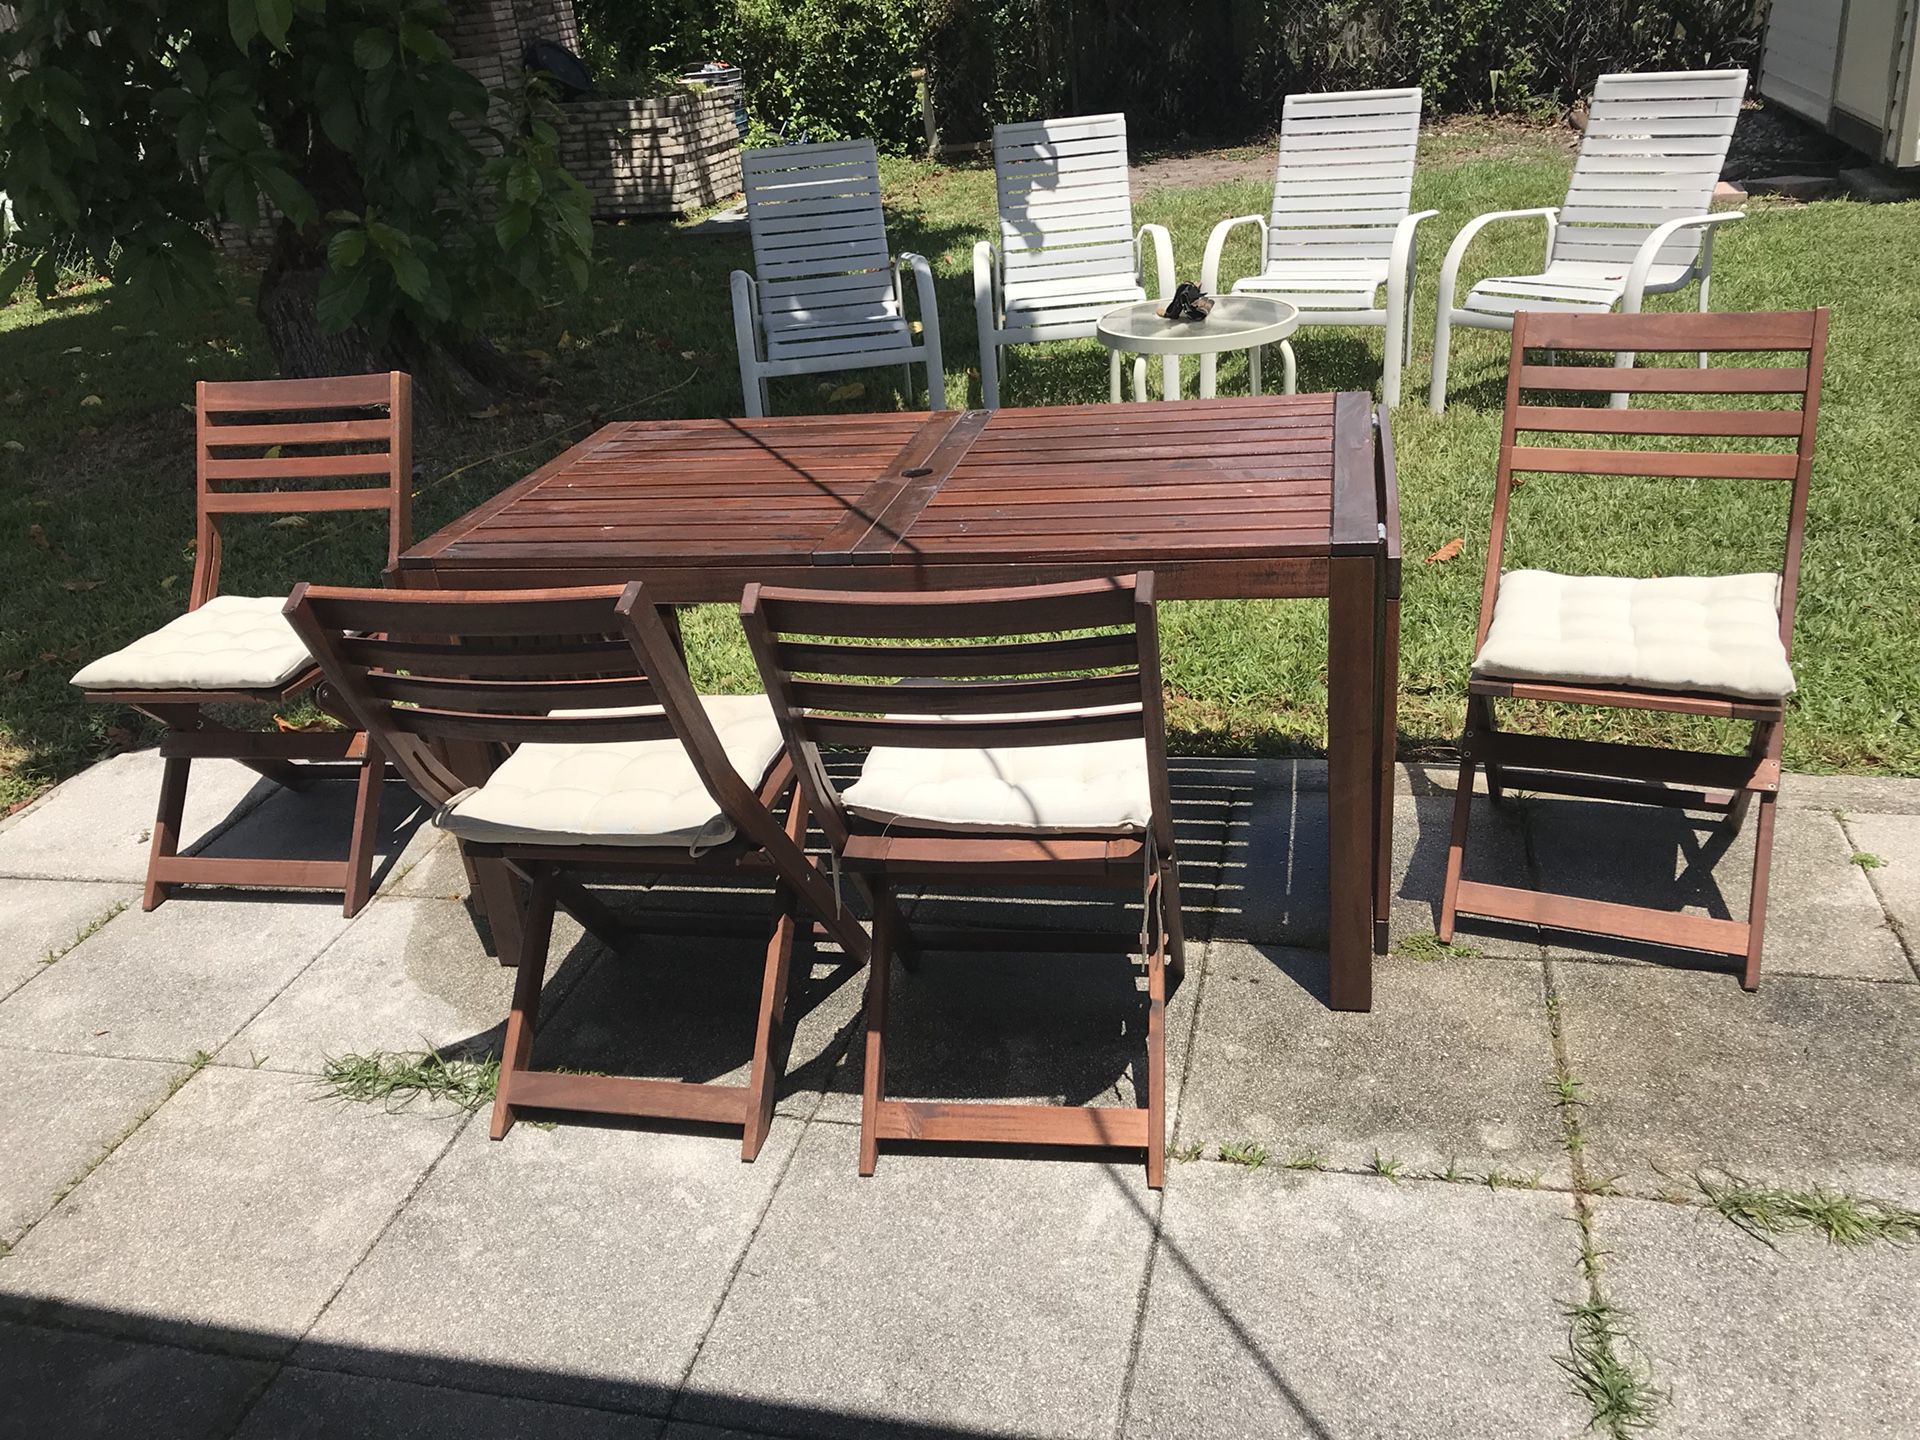 IKEA outdoor table and chairs (brown set w/ seat covers)